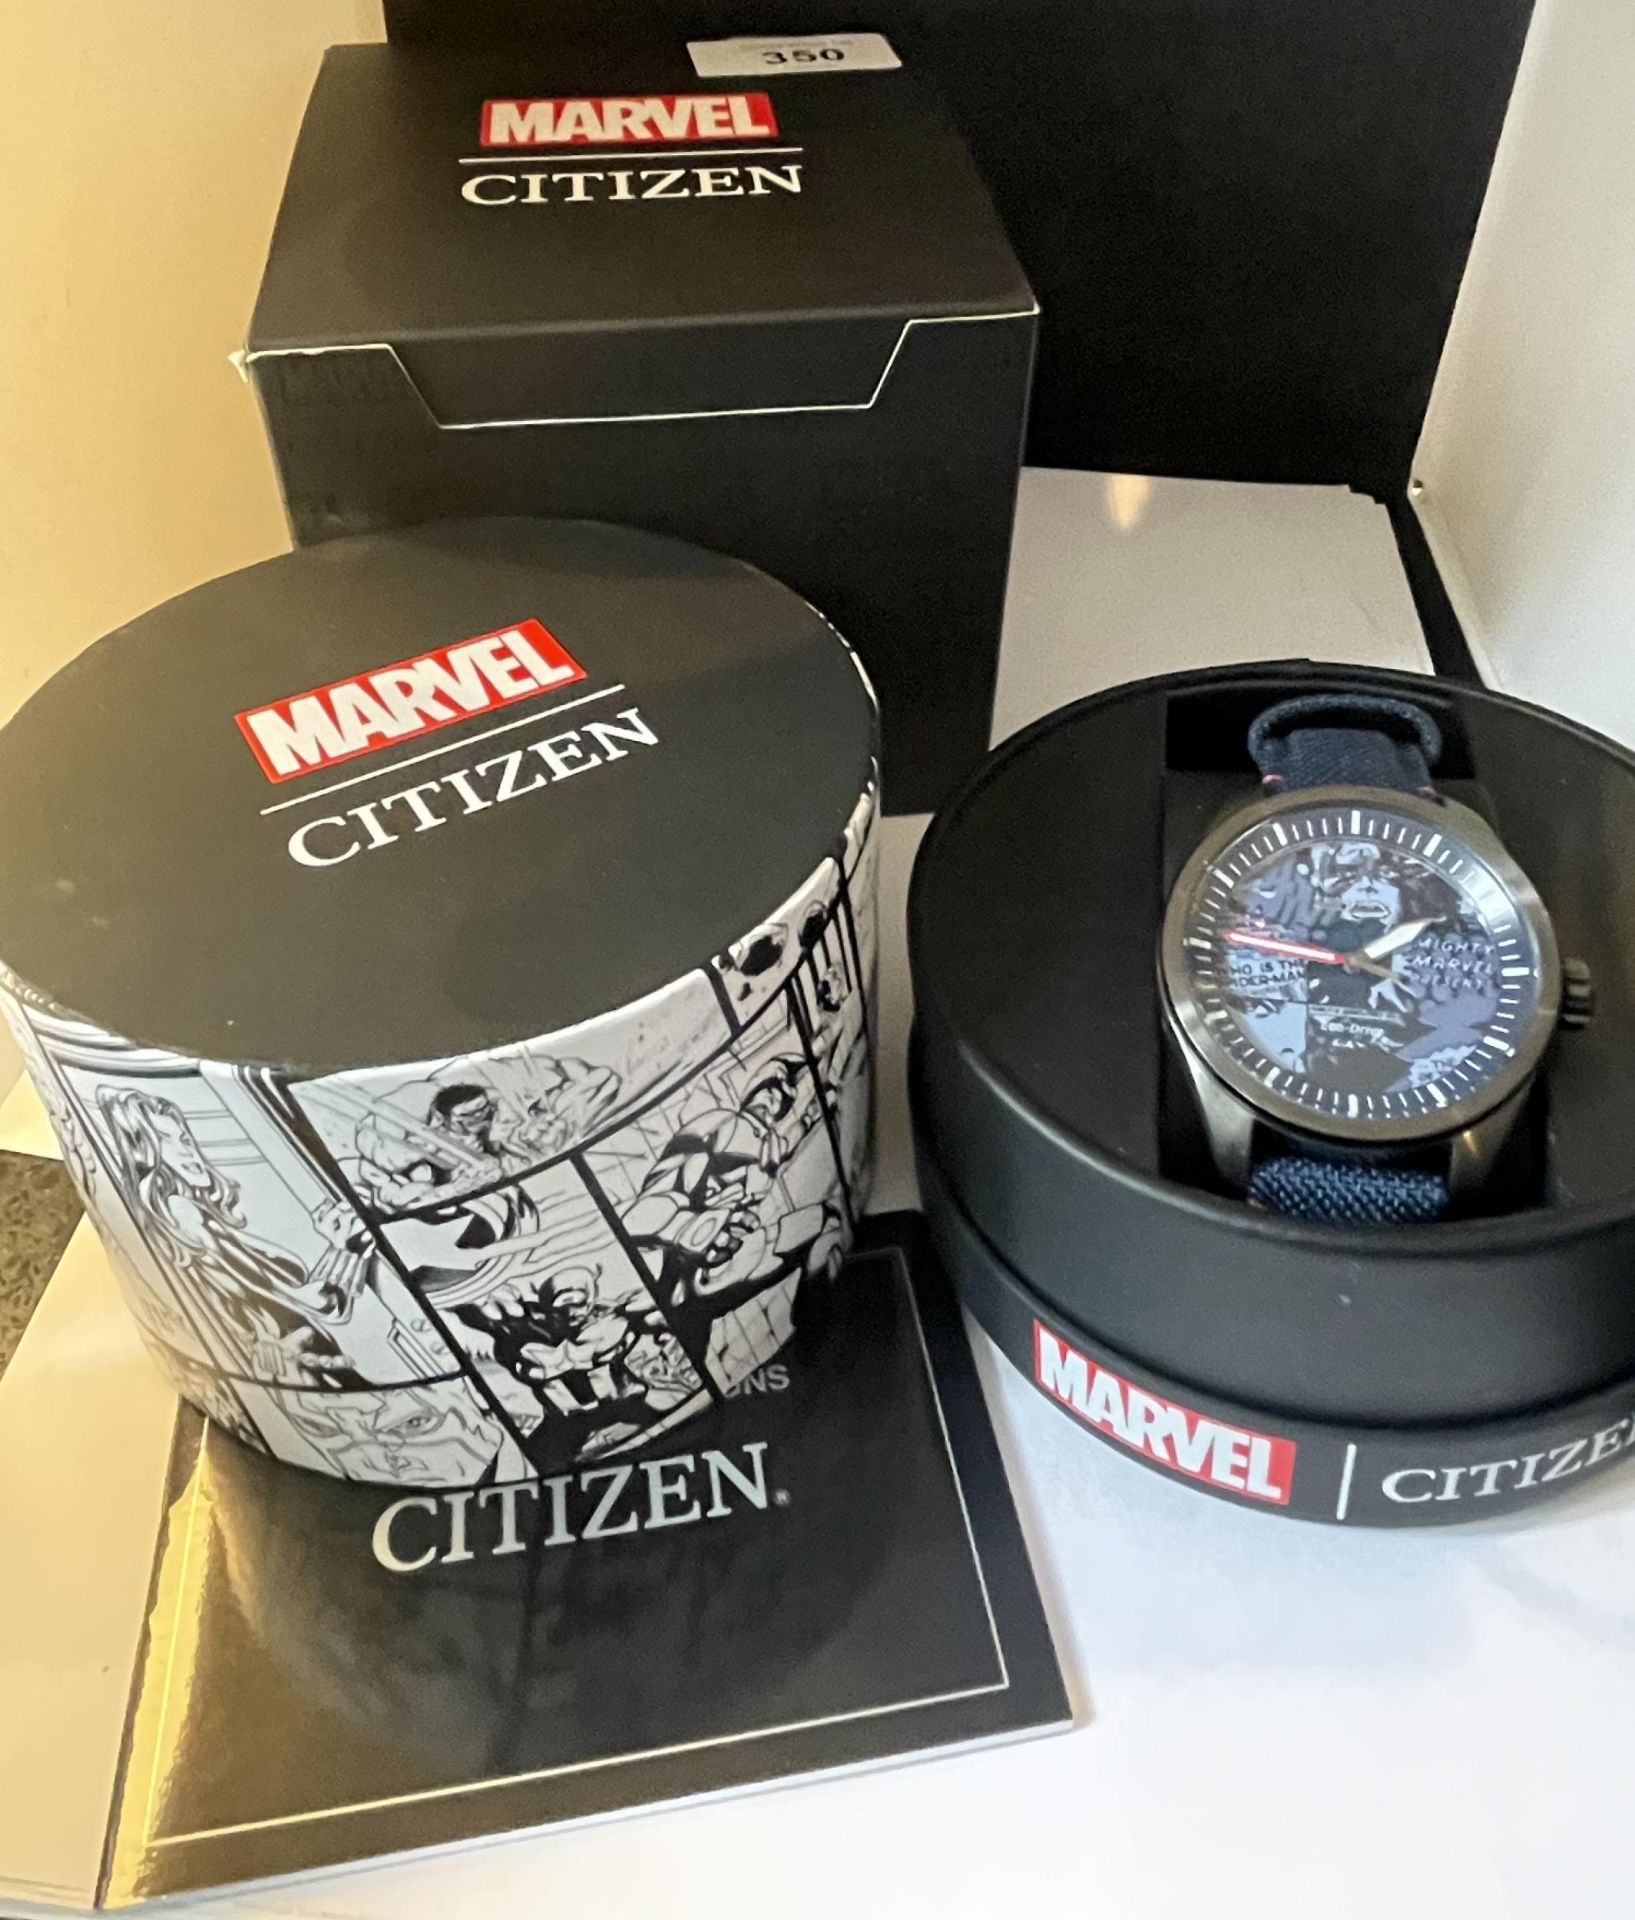 A GENTS CITIZEN ECO DRIVE MARVEL COMICS WRIST WATCH WITH ORIGINAL BOX SEEN WORKING BUT NO WARRANTY